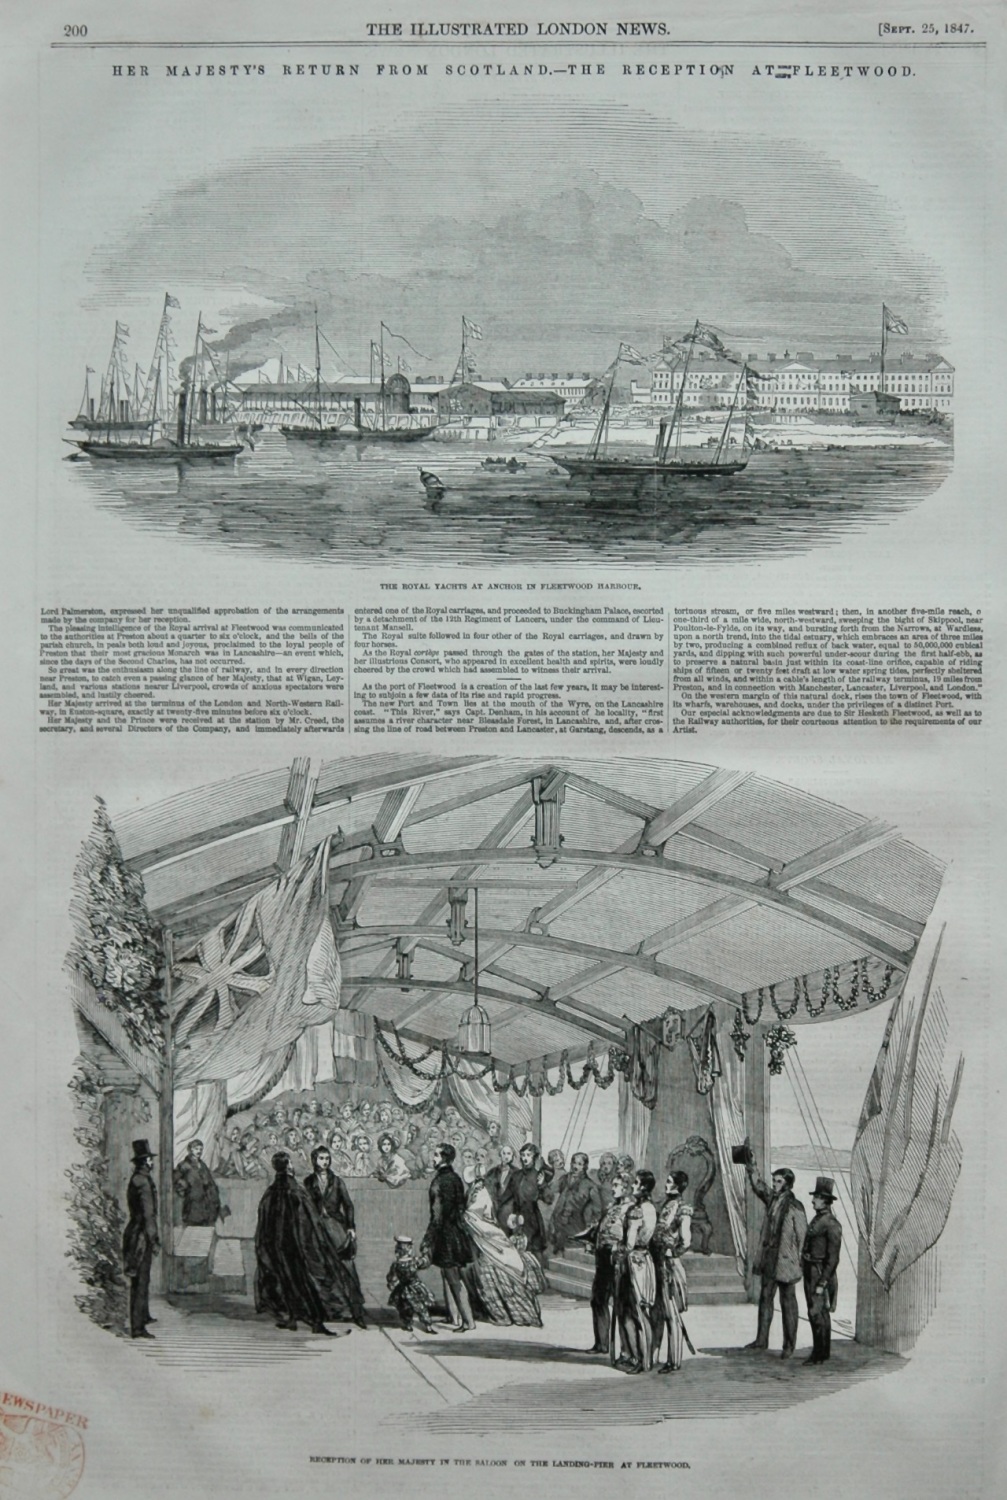 Her Majesty's Return from Scotland.-The Reception at Fleetwood.  1847.